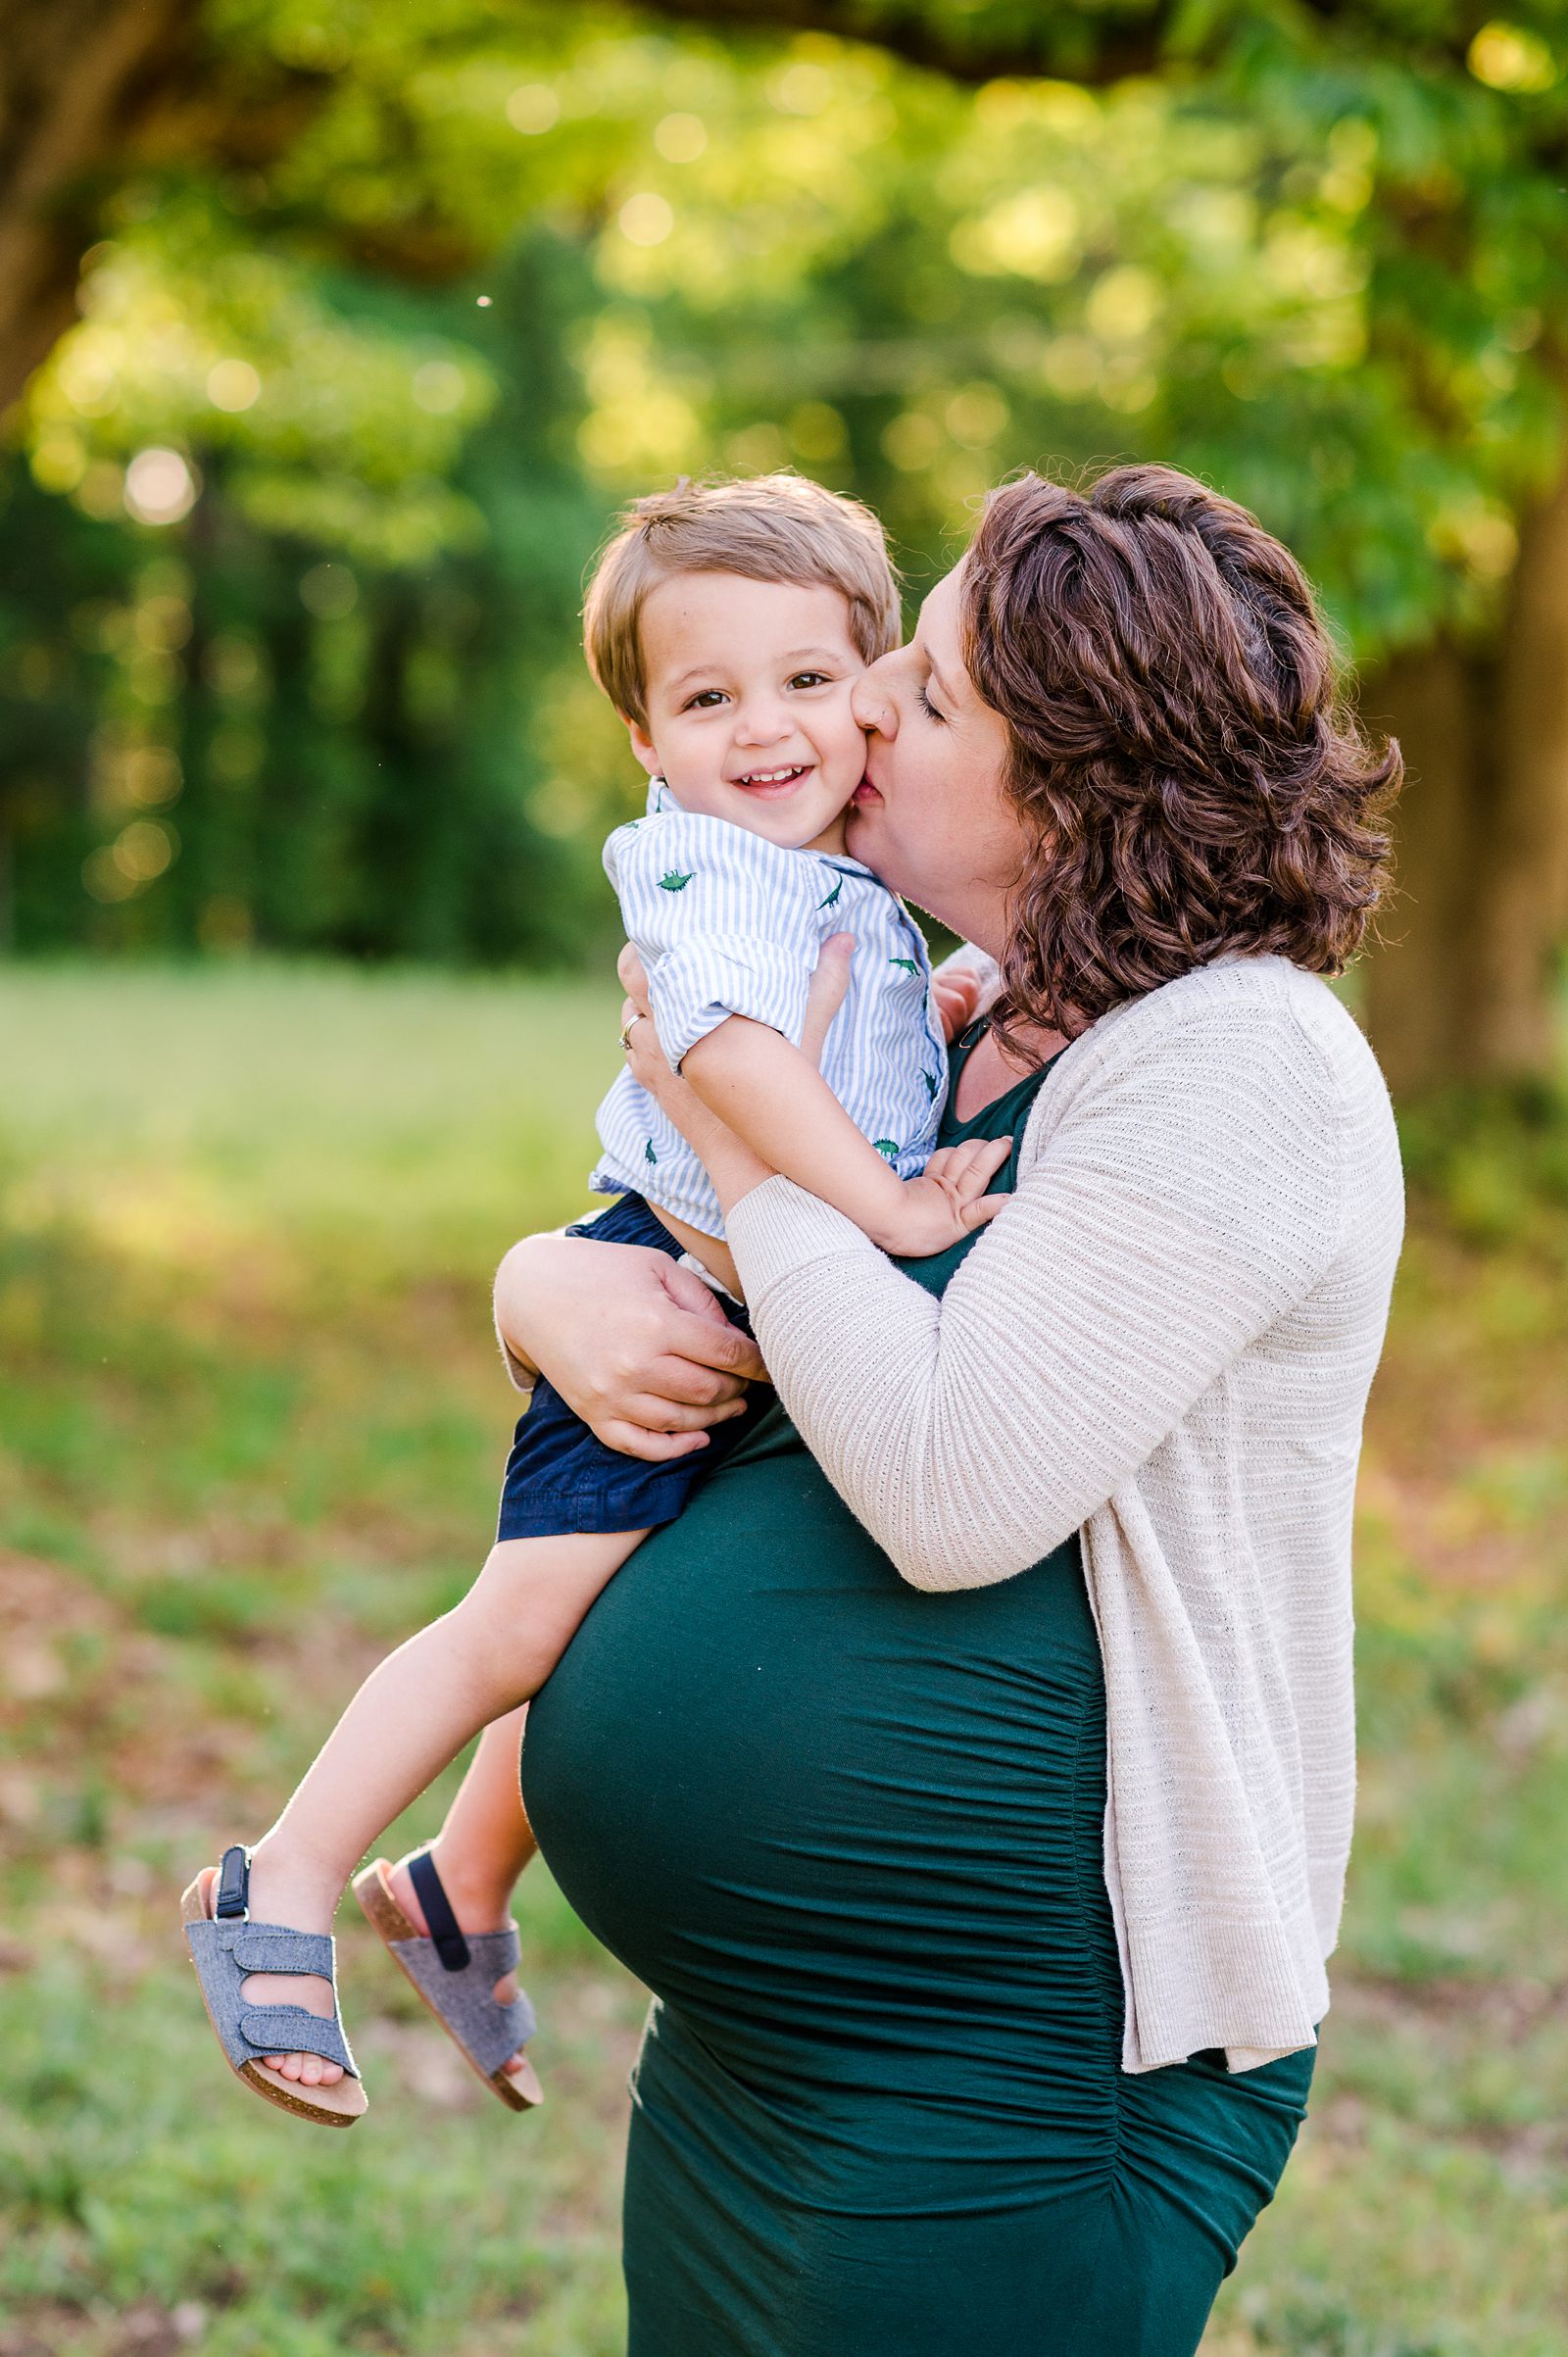 2020 Richmond Spring Mini Sessions at Rural Plains Park with Richmond Family Photographer Kailey Brianne Photography. 